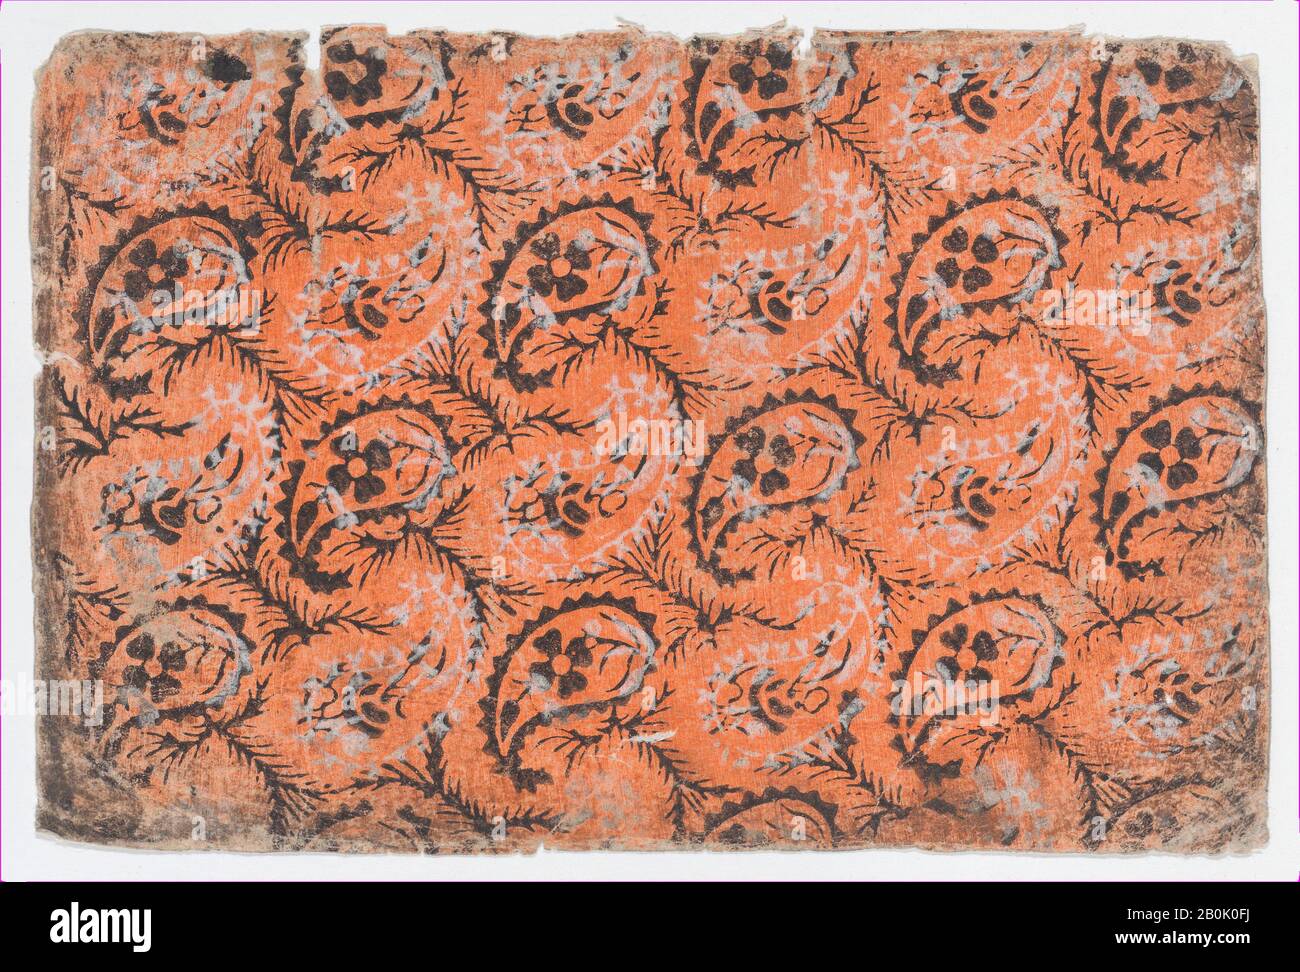 Anonymous, Sheet with overall paisley pattern, Anonymous, 19th century, 19th century, Relief print (wood or metal), Sheet: 6 5/8 × 4 7/16 in. (16.8 × 11.3 cm), Prints Stock Photo